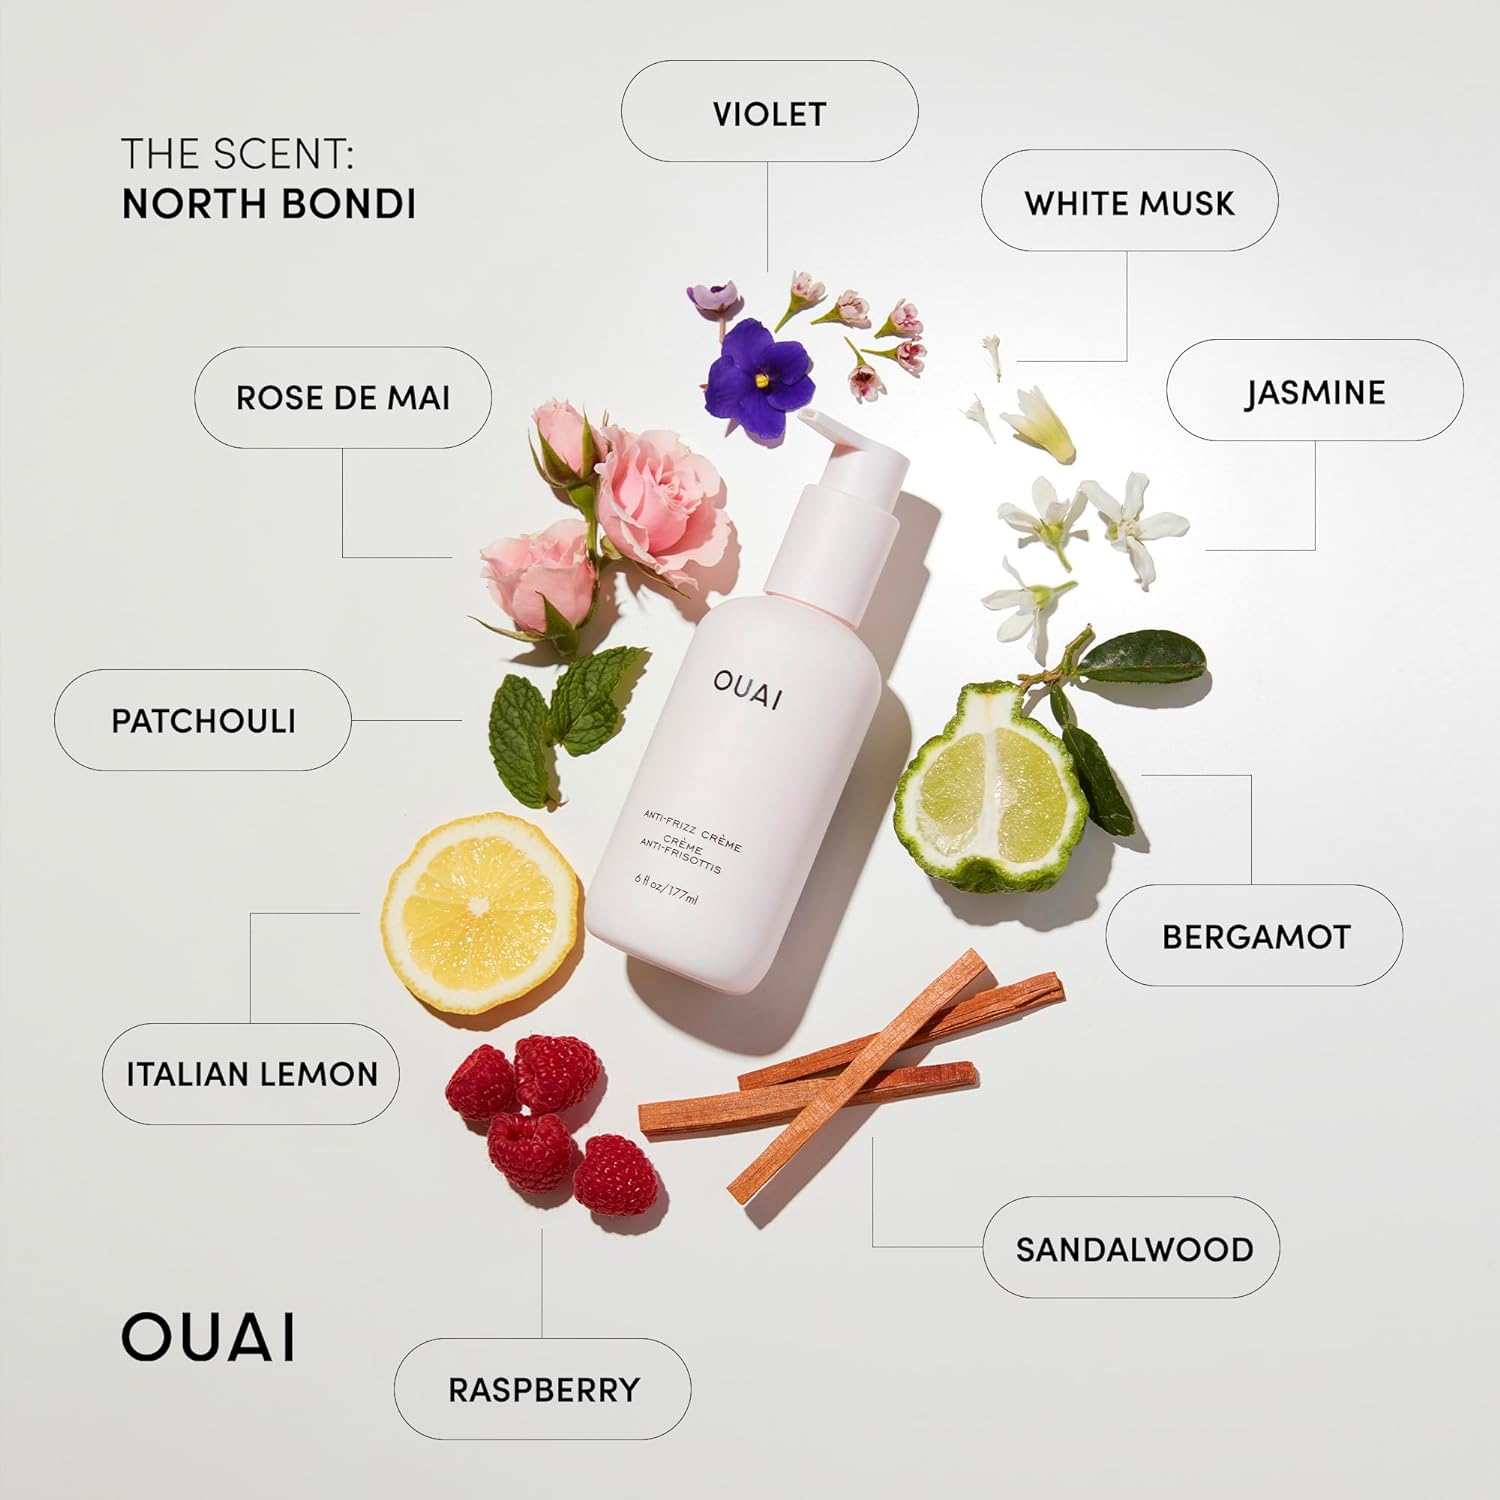 OUAI Anti Frizz Cream - Moisturizing Hair Cream with Frizz Control & Heat Protection - Provides Lasting Hydration with Jackfruit & Beetroot Extract - Paraben, Phthalate & Sulfate Free (6 oz) : Beauty & Personal Care